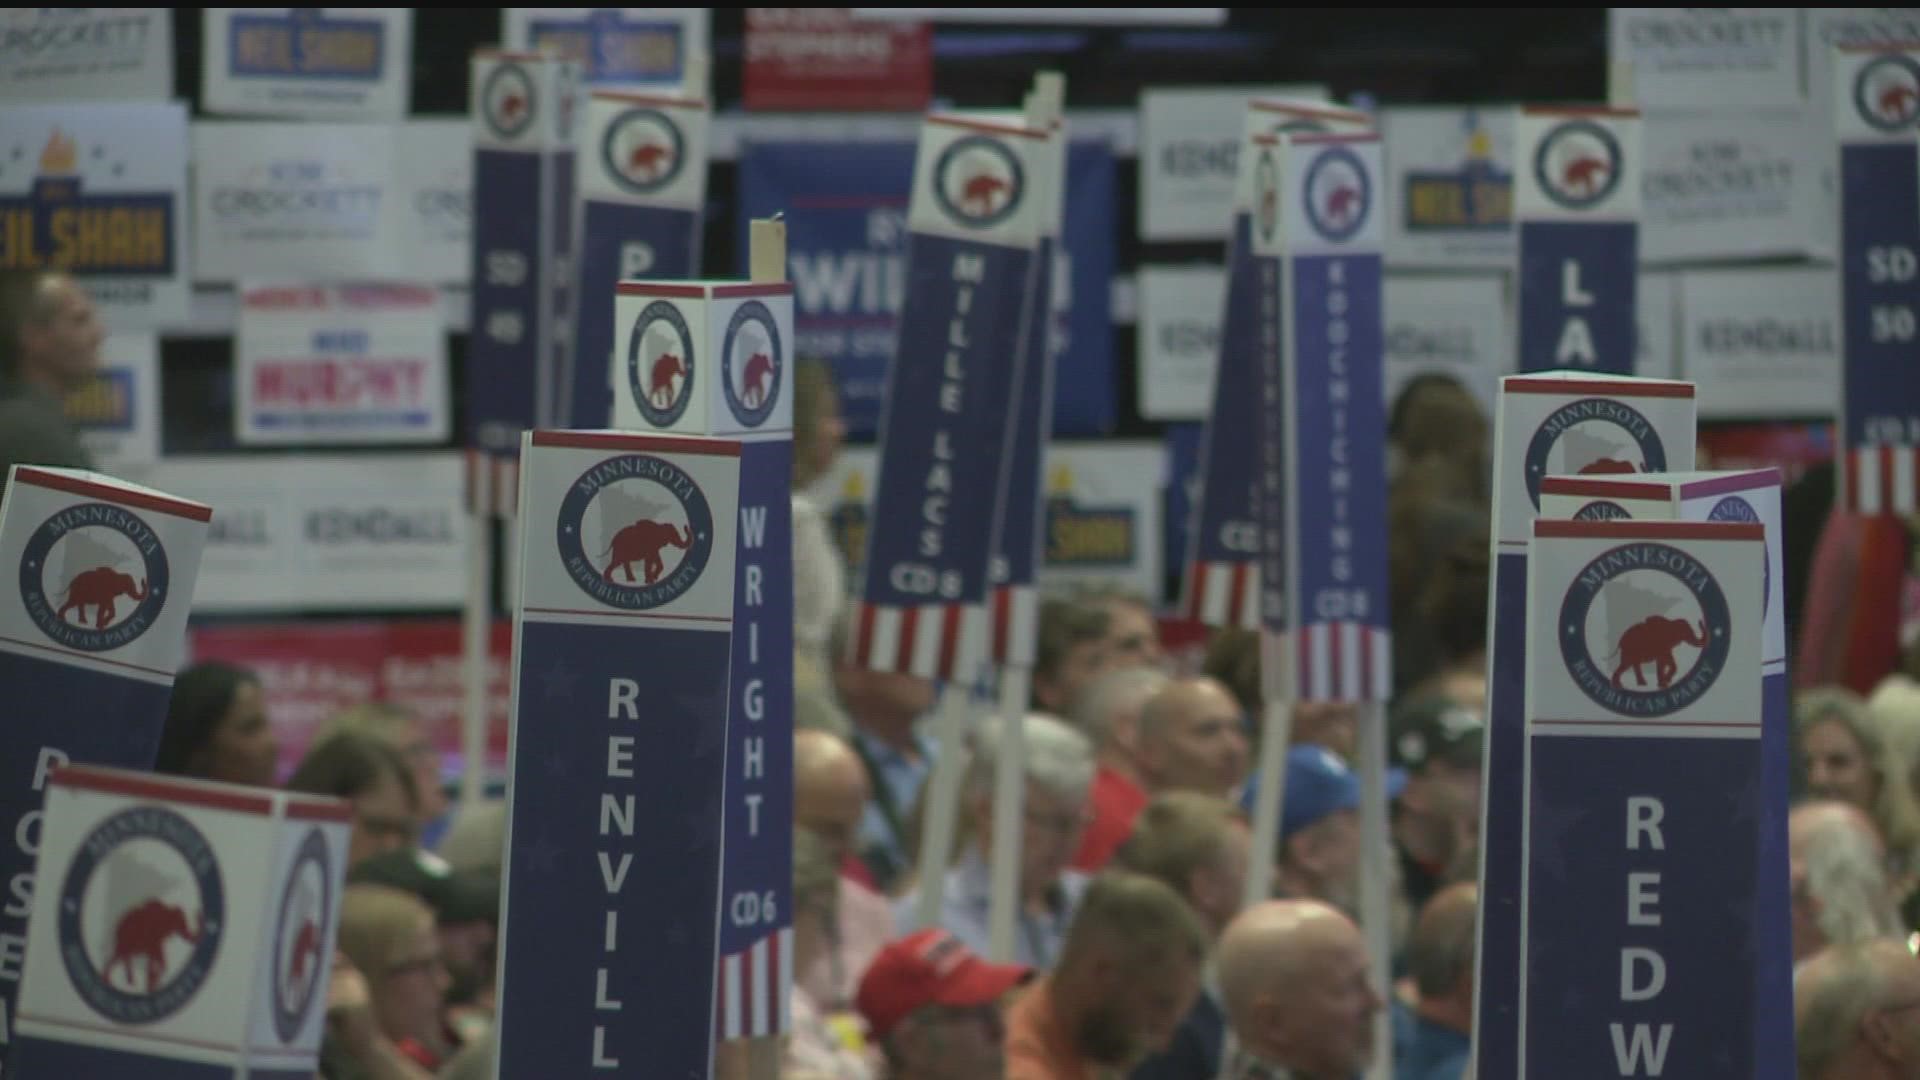 Republicans arrived in Rochester Friday to attend the Minnesota GOP State Convention, where candidates for several major races will vie for the party’s endorsement.